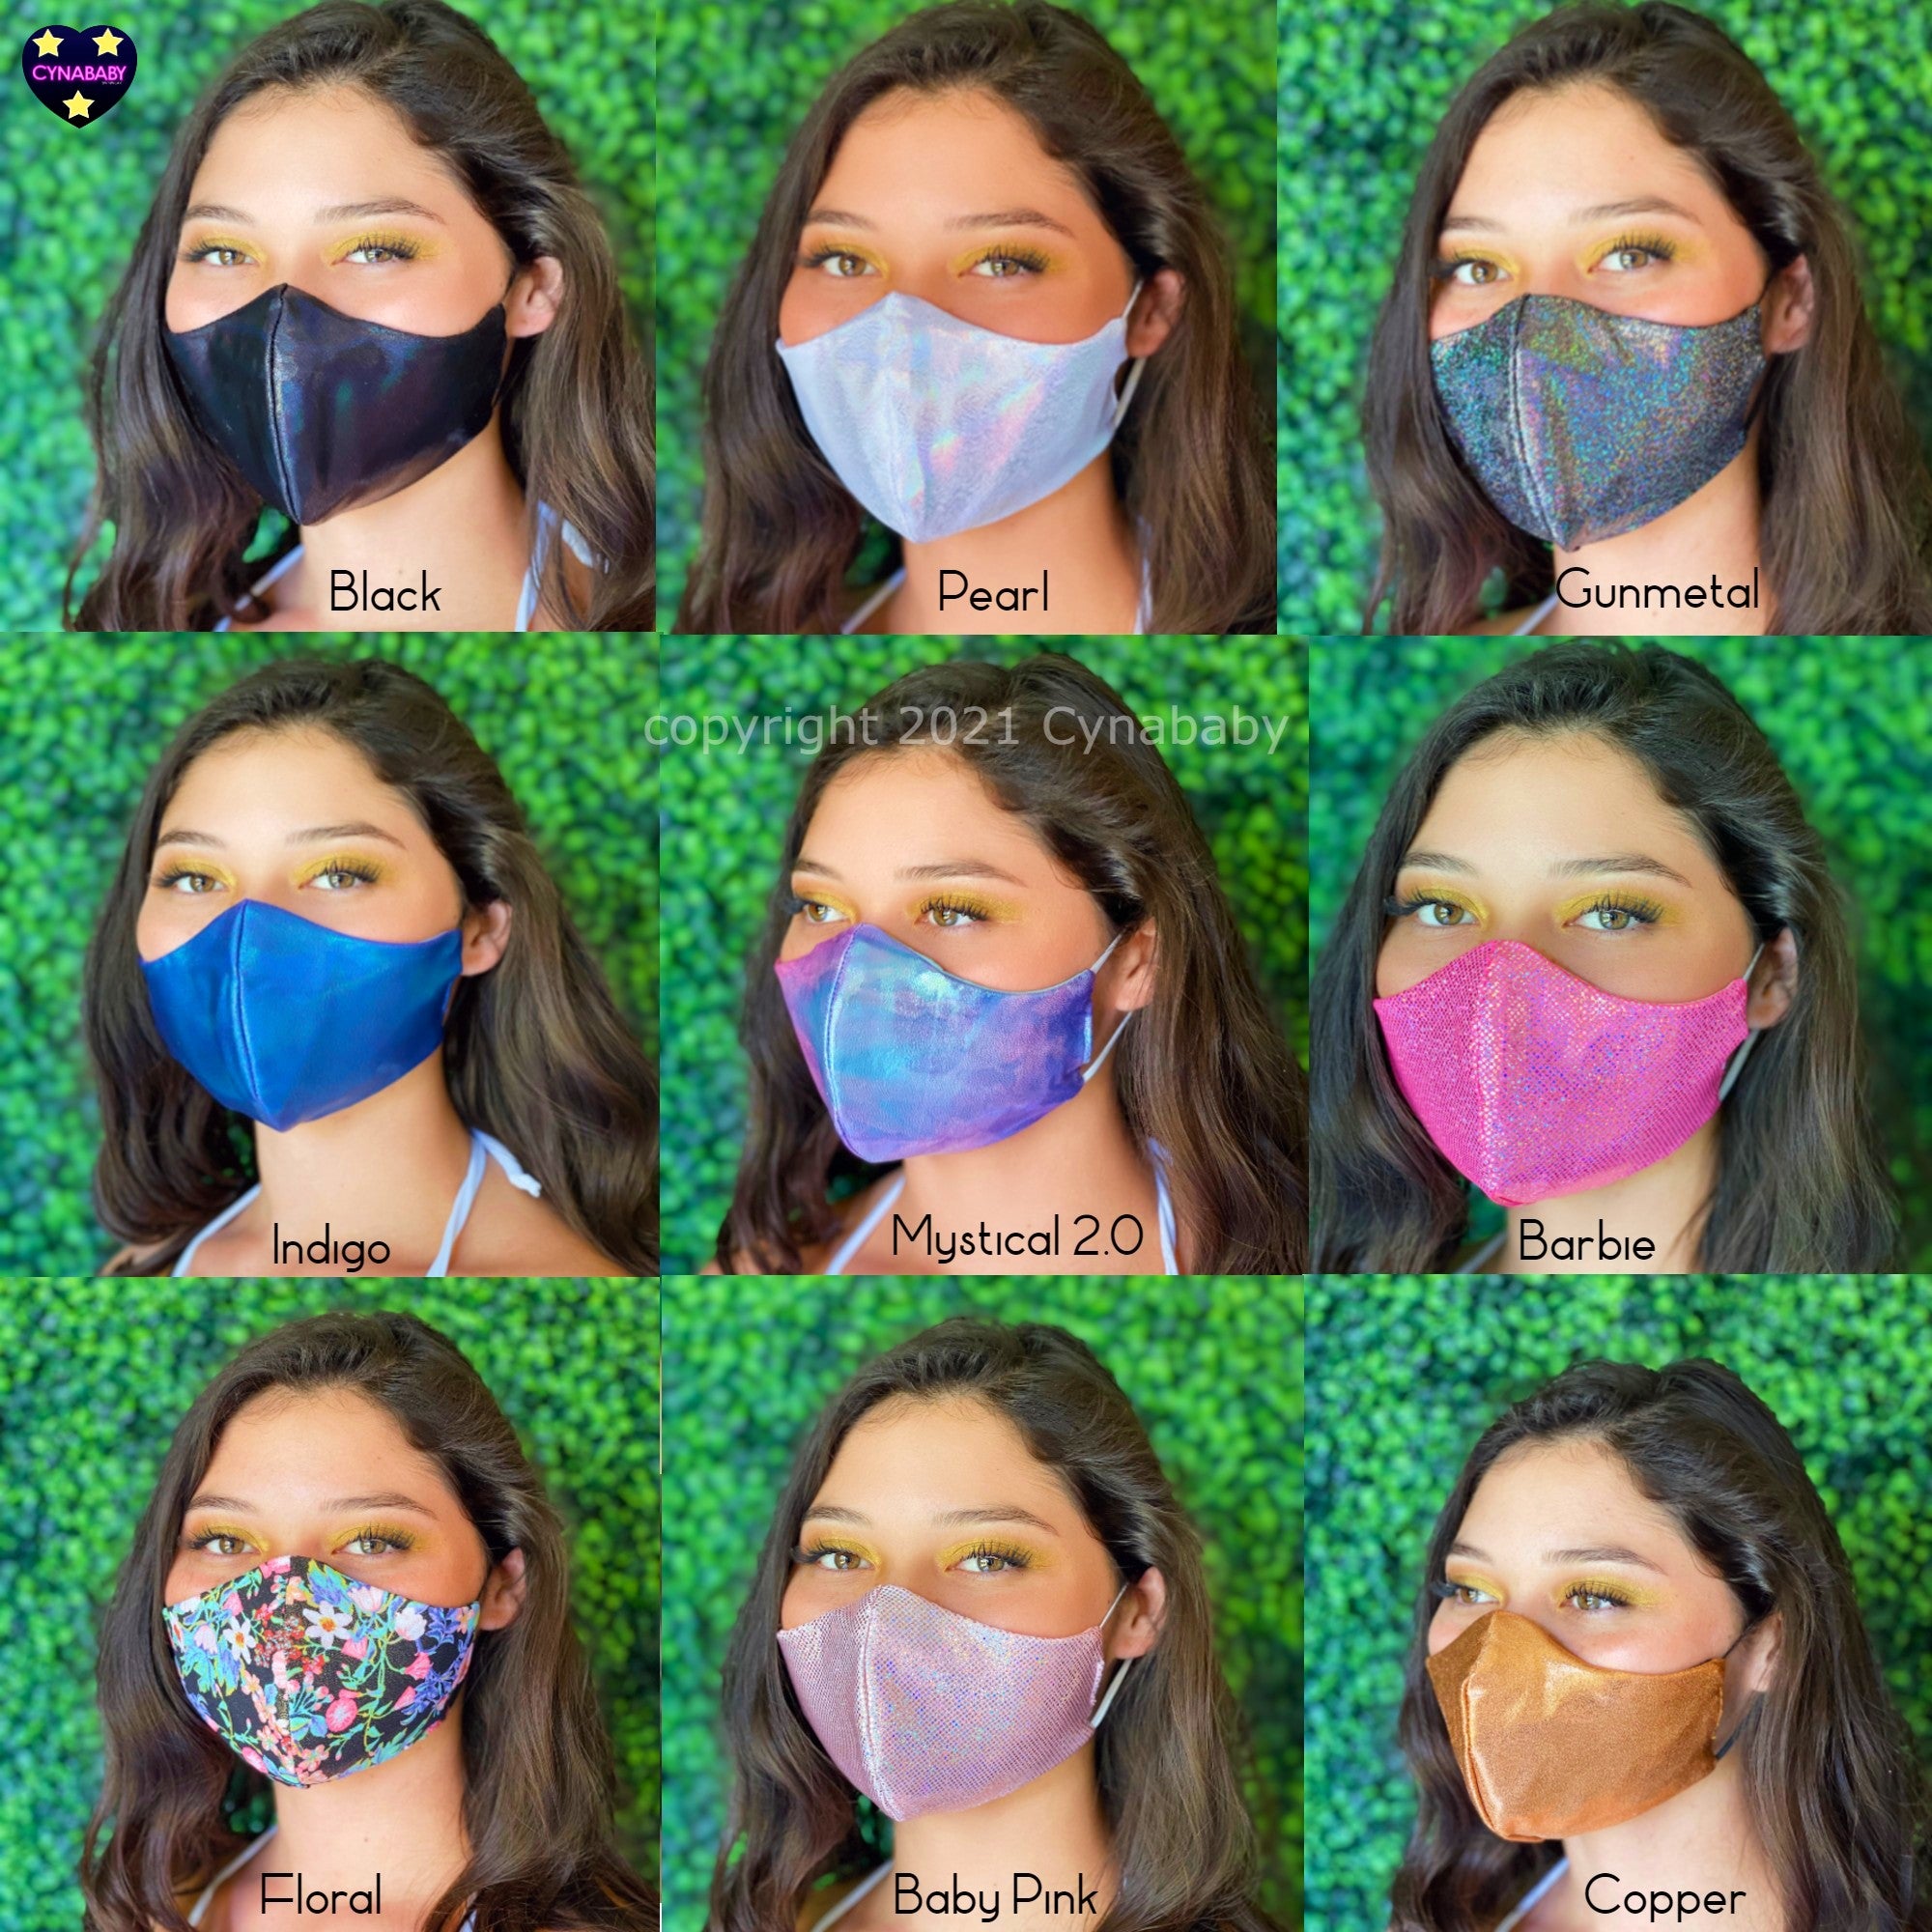 Iridescent Sparkly Cloth Face Masks 3 Pack - SHIPS FAST! USA made Fitted 3 layer Glitter Cloth Face Masks